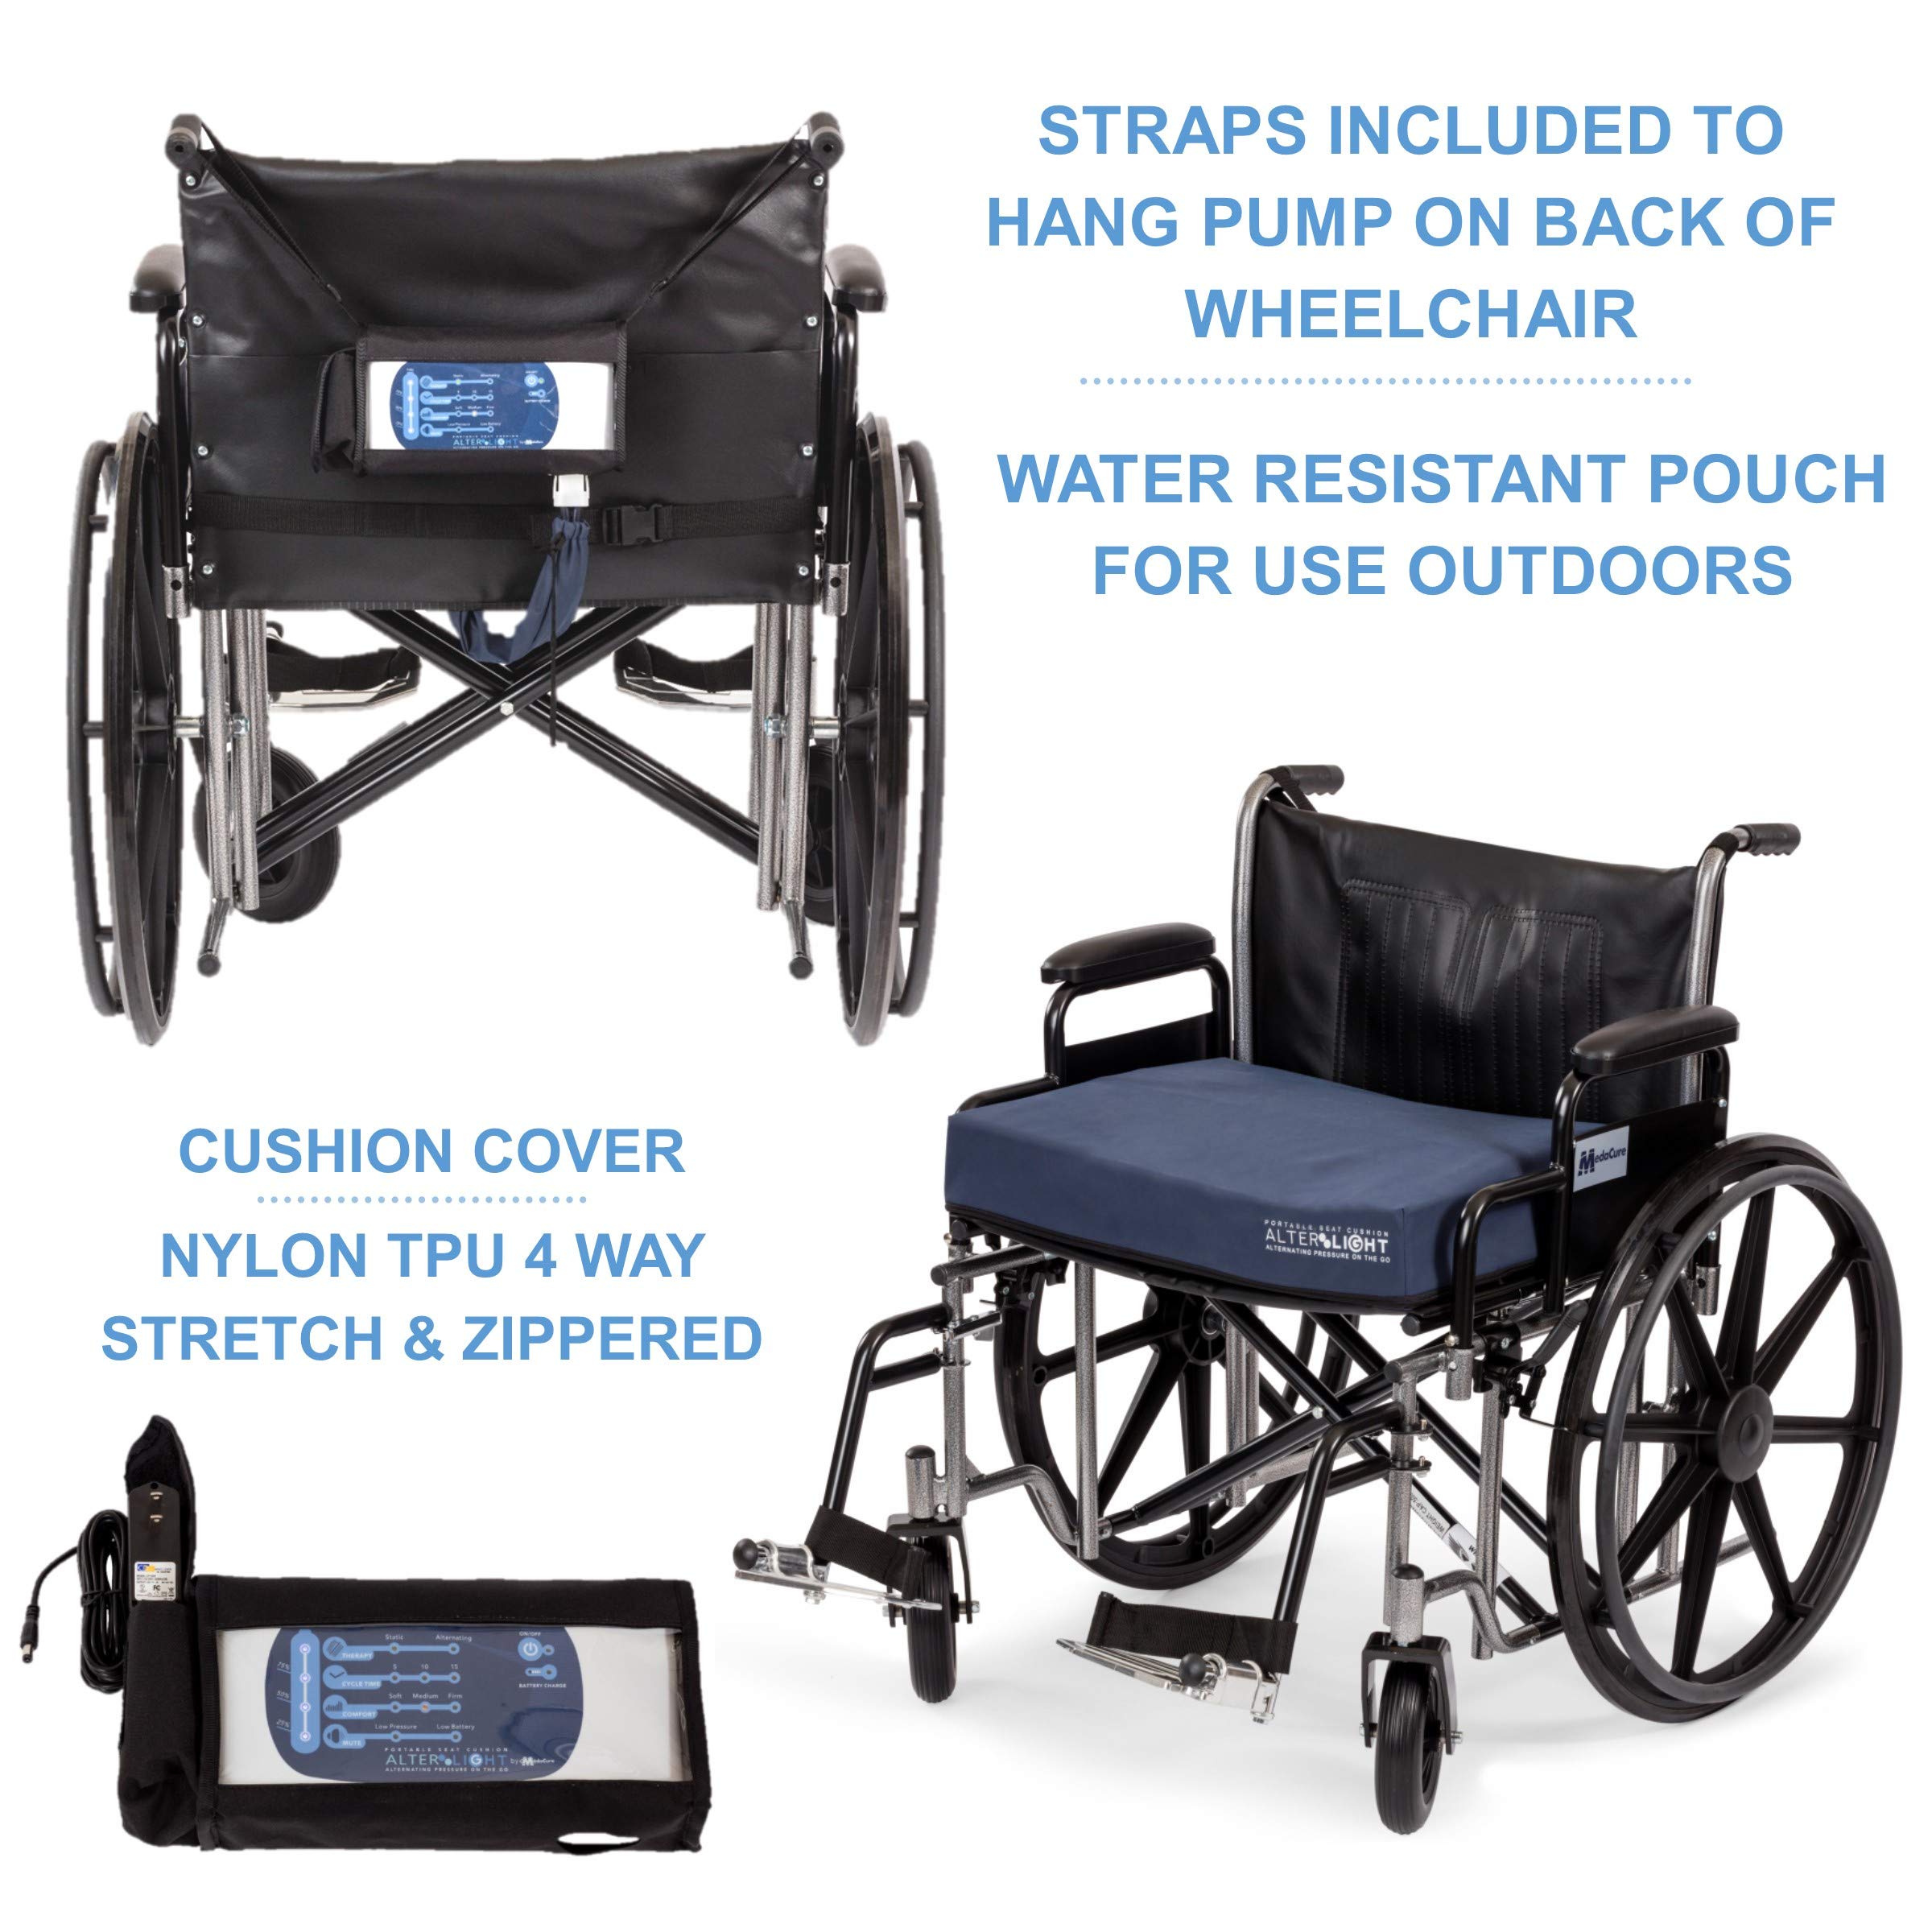 Alter Light Alternating Pressure SEAT Cushion with Low AIR Loss for WHEELCHAIRS, GERI Chairs, Mobility Scooter and CAR  - Like New